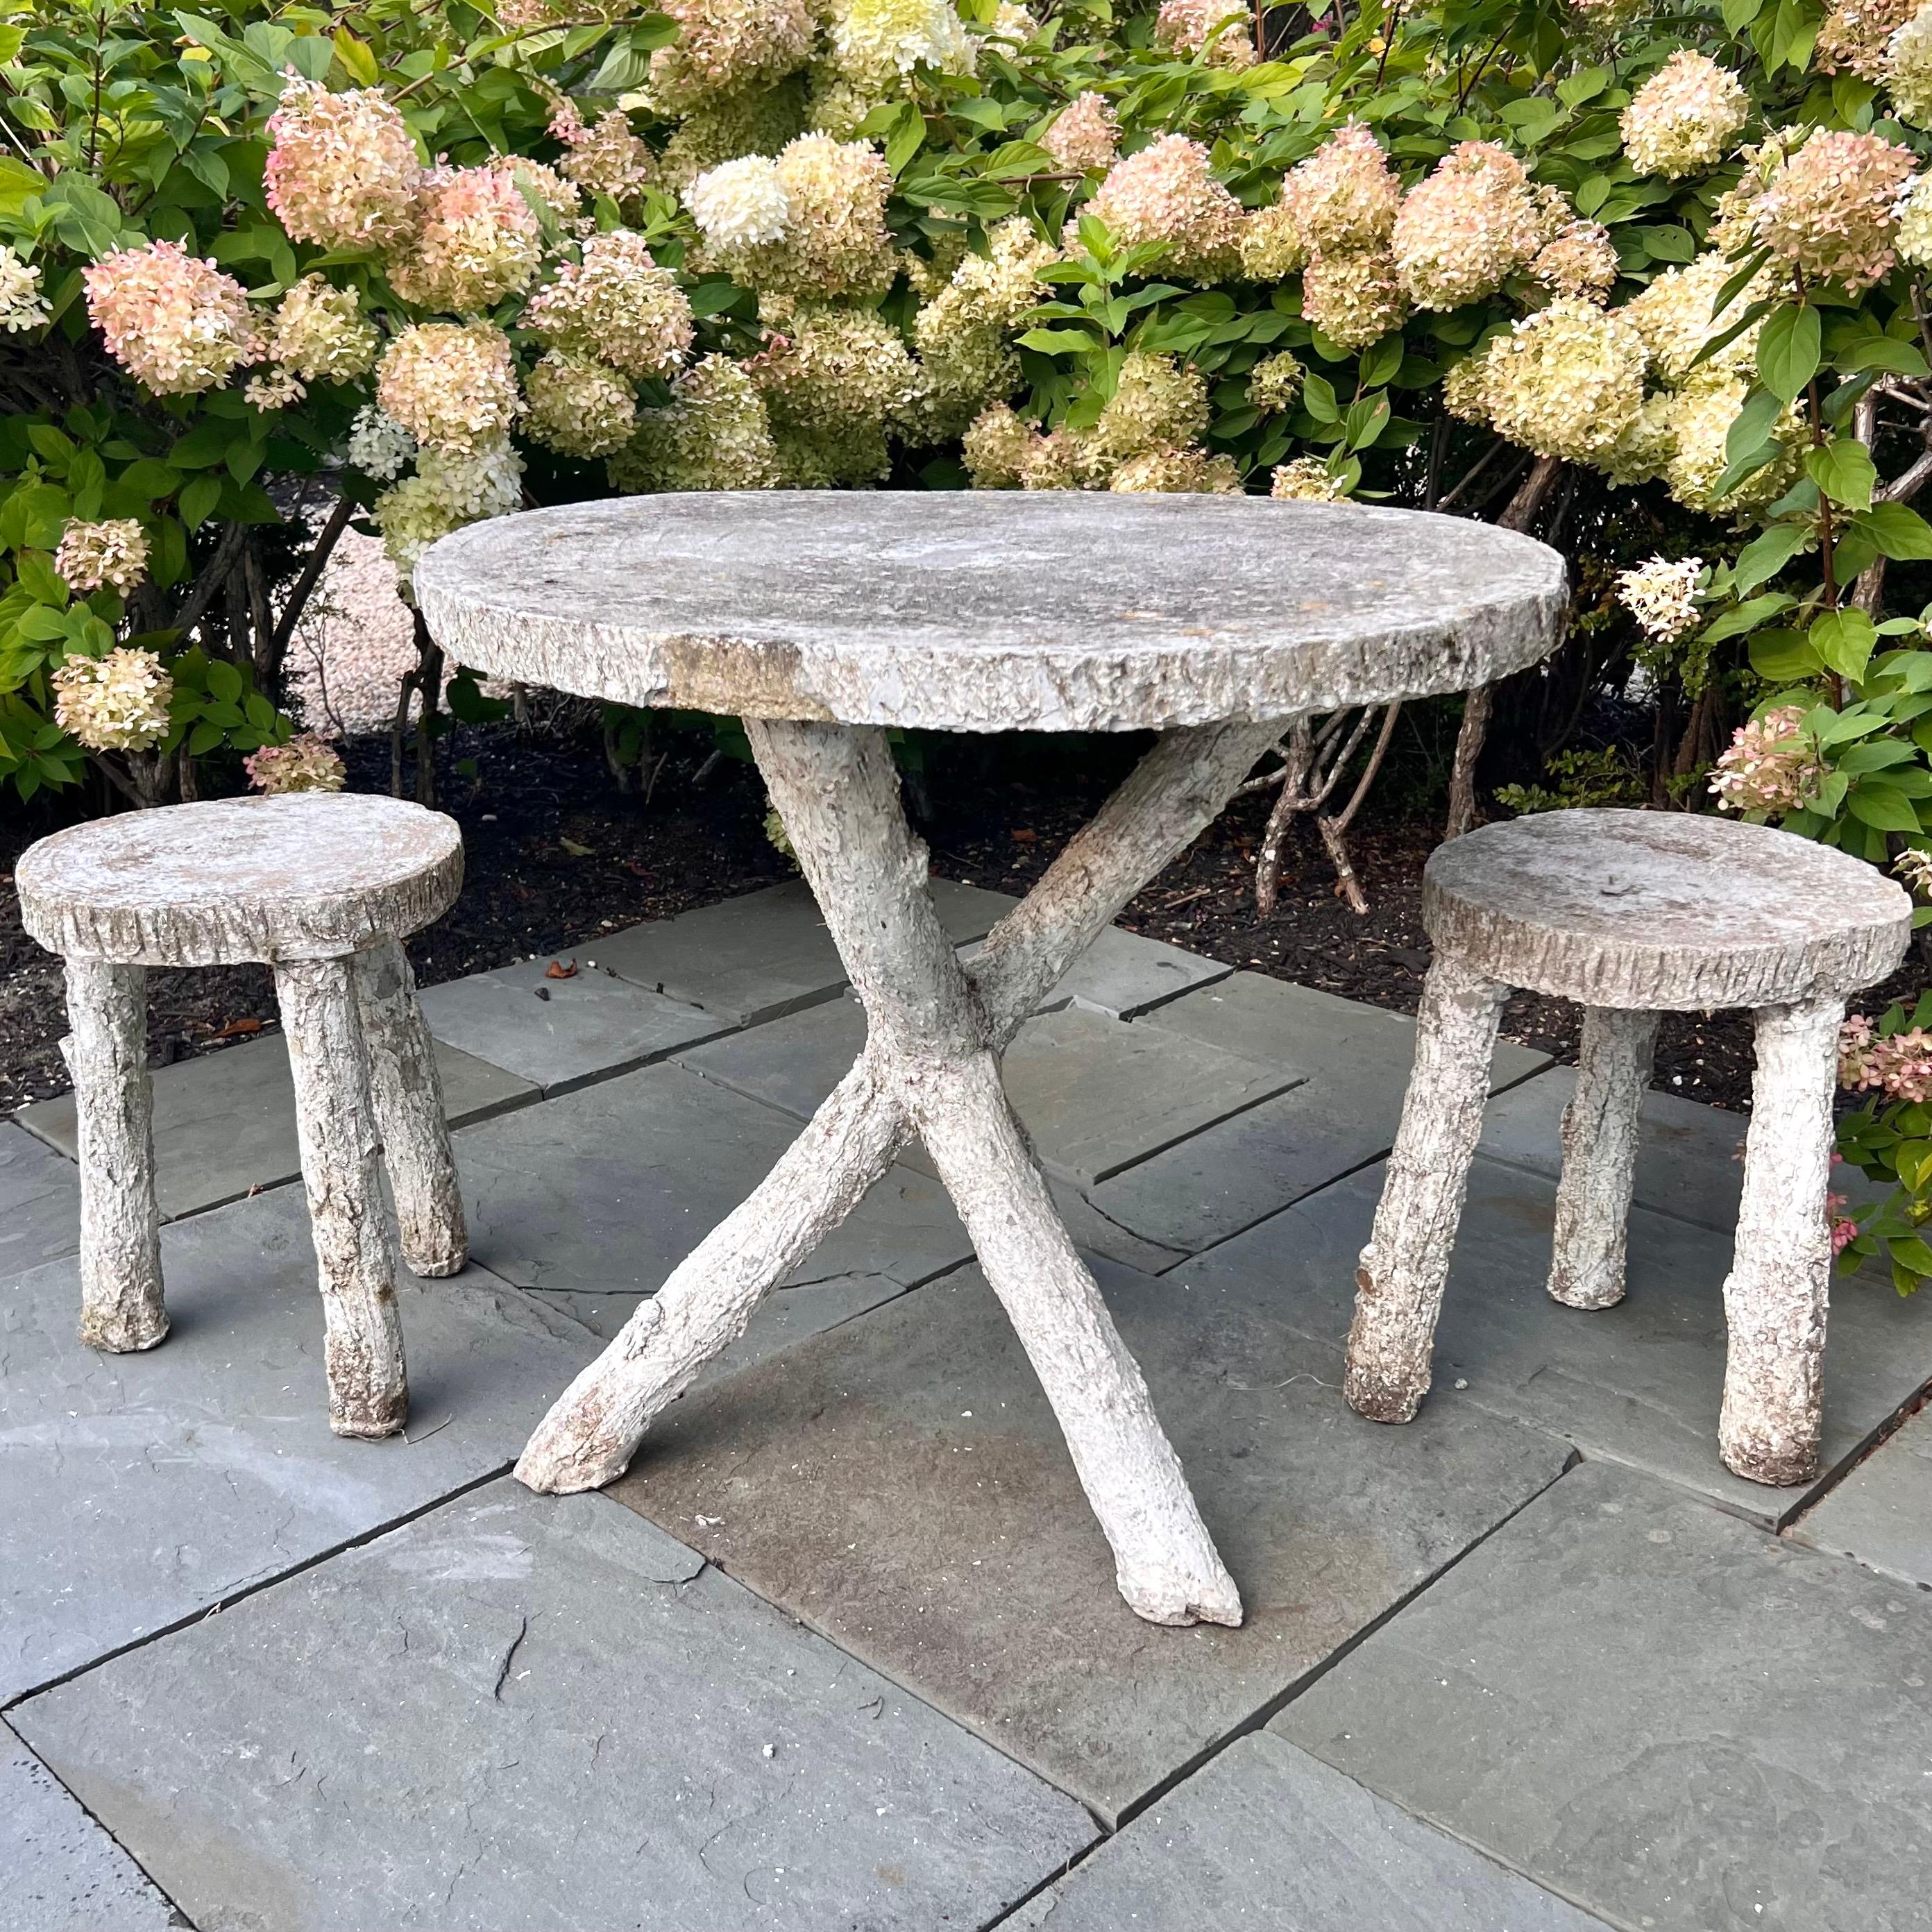 Stunning faux bois concrete table and matching stools from France, made in the 1960s. 2 tripod stools and one tripod table included in this set. The table features long crossed legs at the base with a brutalist design. 2 tripod stools easily stow